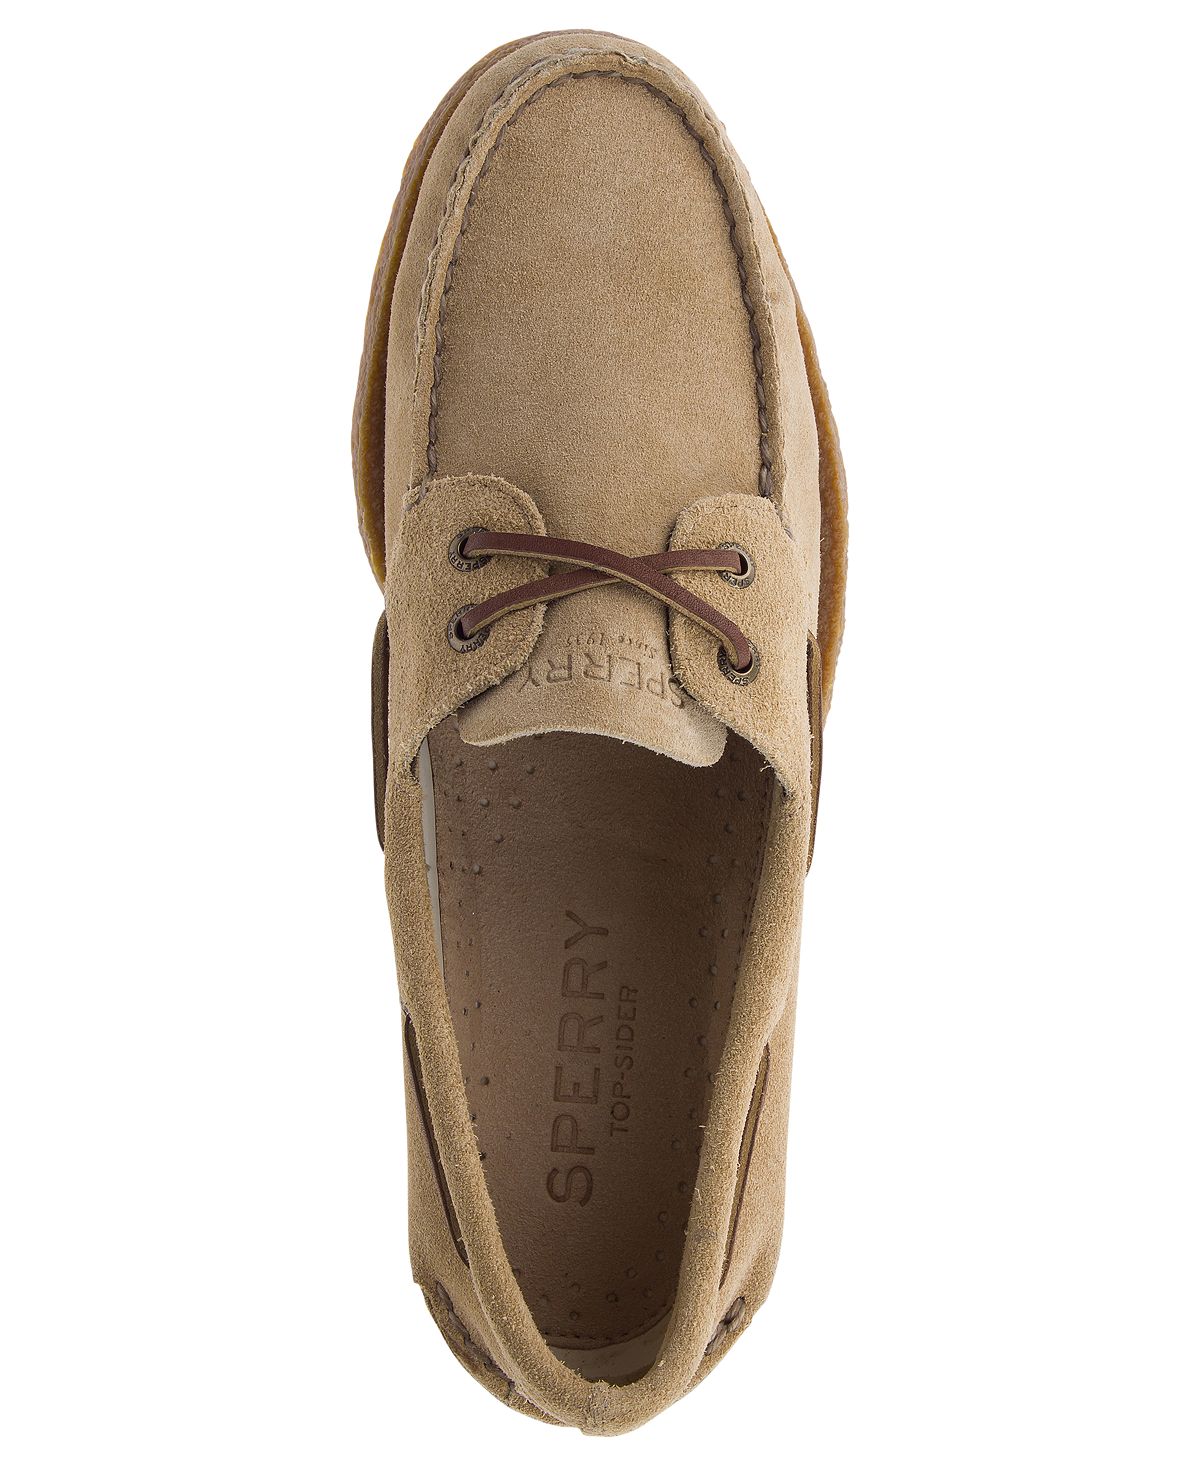 Sperry A/o 2 Eye Suede Boat Shoes Sand